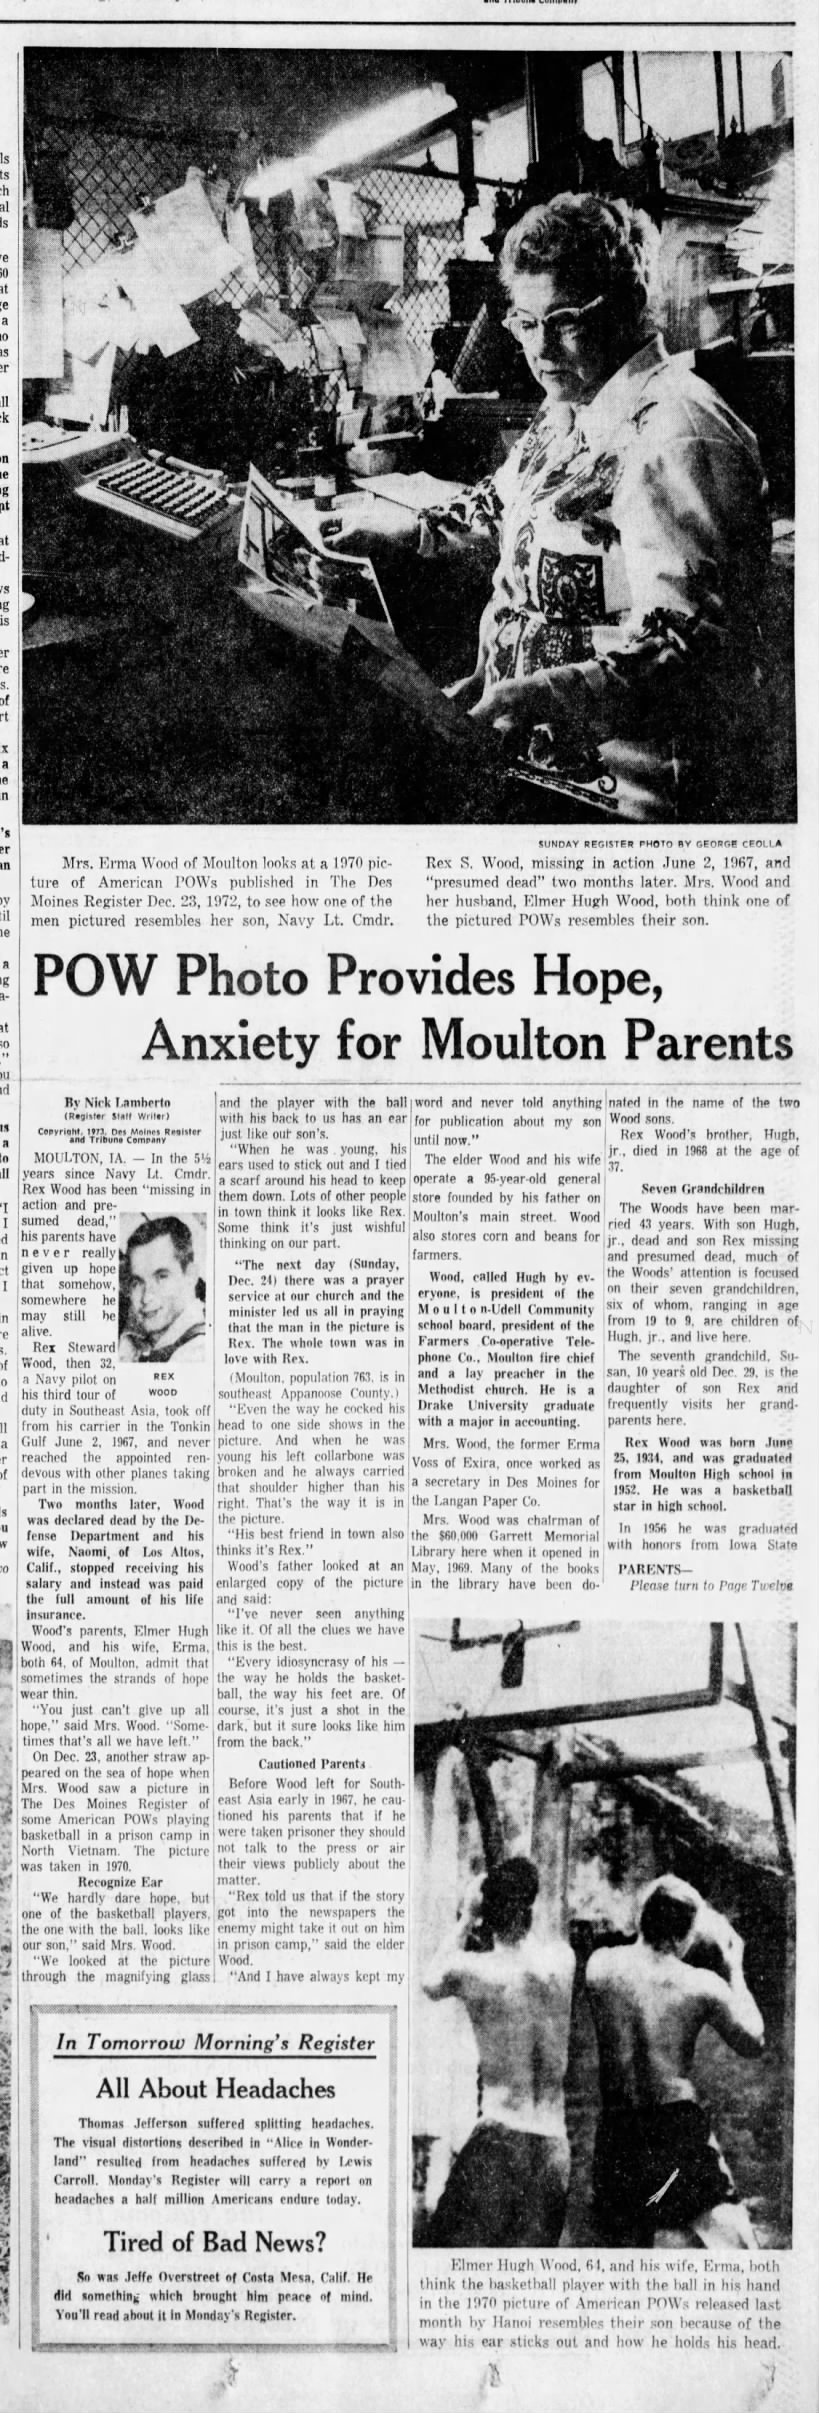 POW photo provides hope; anxiety for Moulton parents: Elmer and Erma Wood